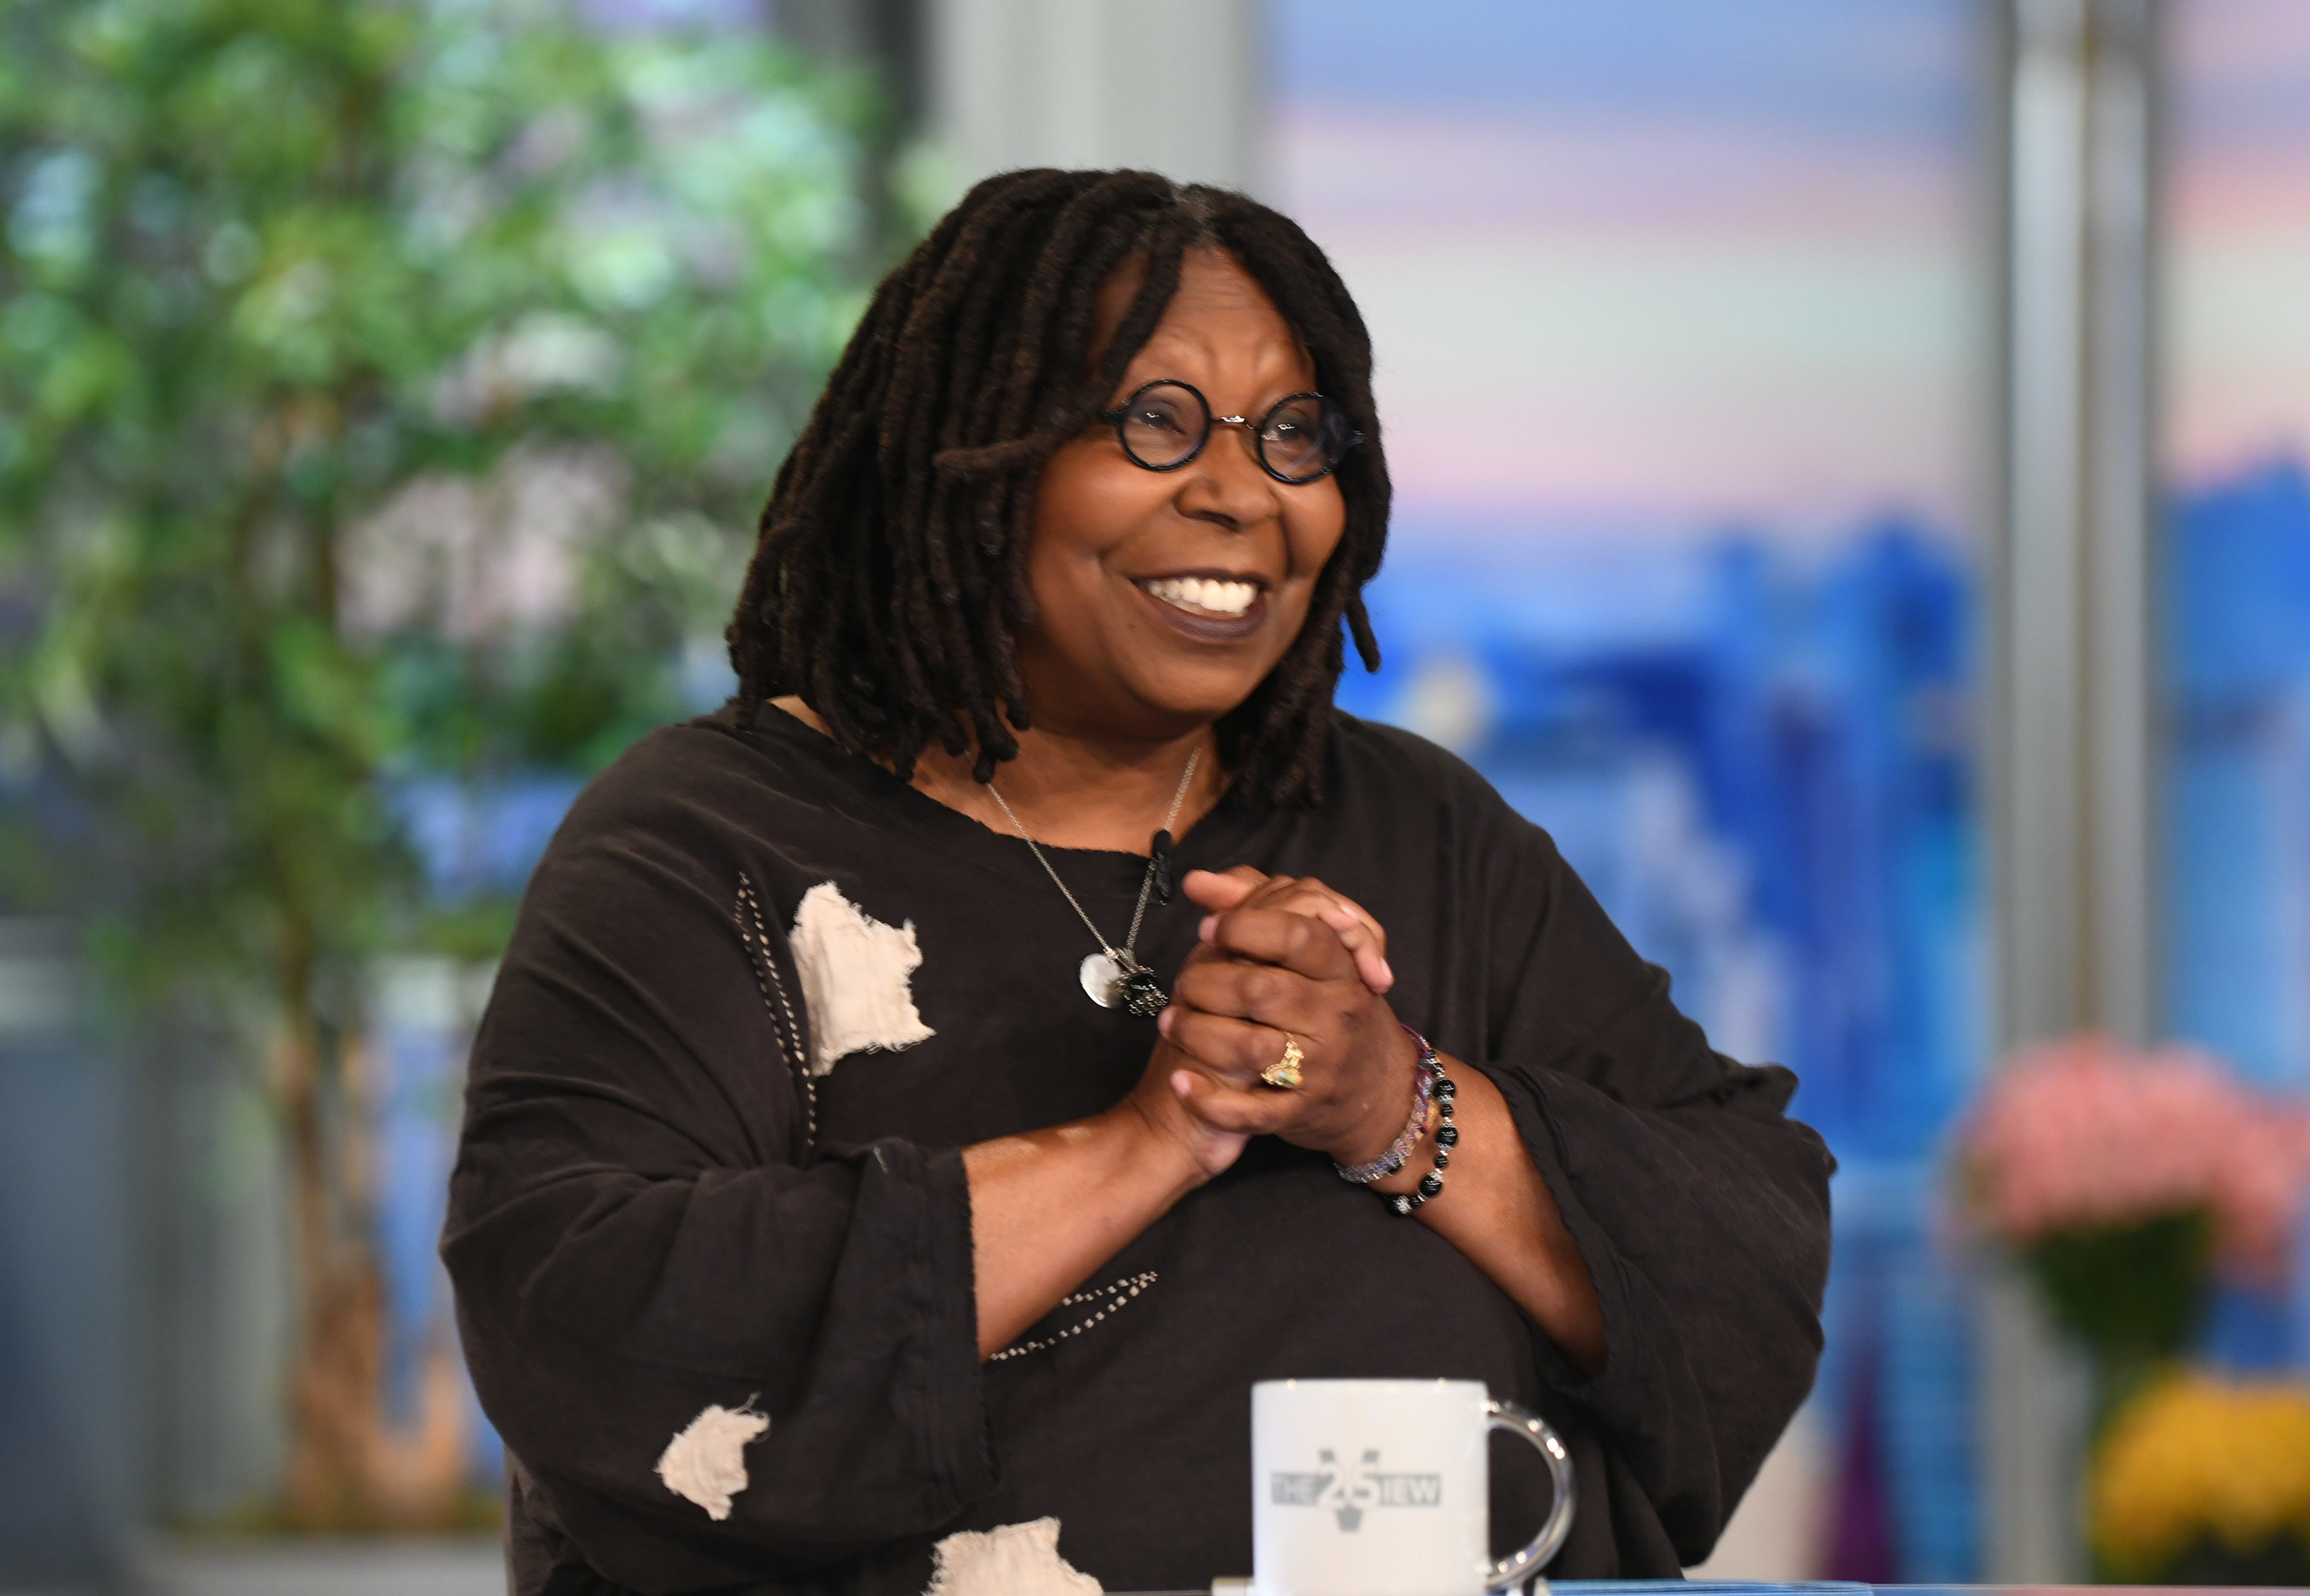 Whoopi Goldberg on &quot;The View&quot; with hands clasped together smiling